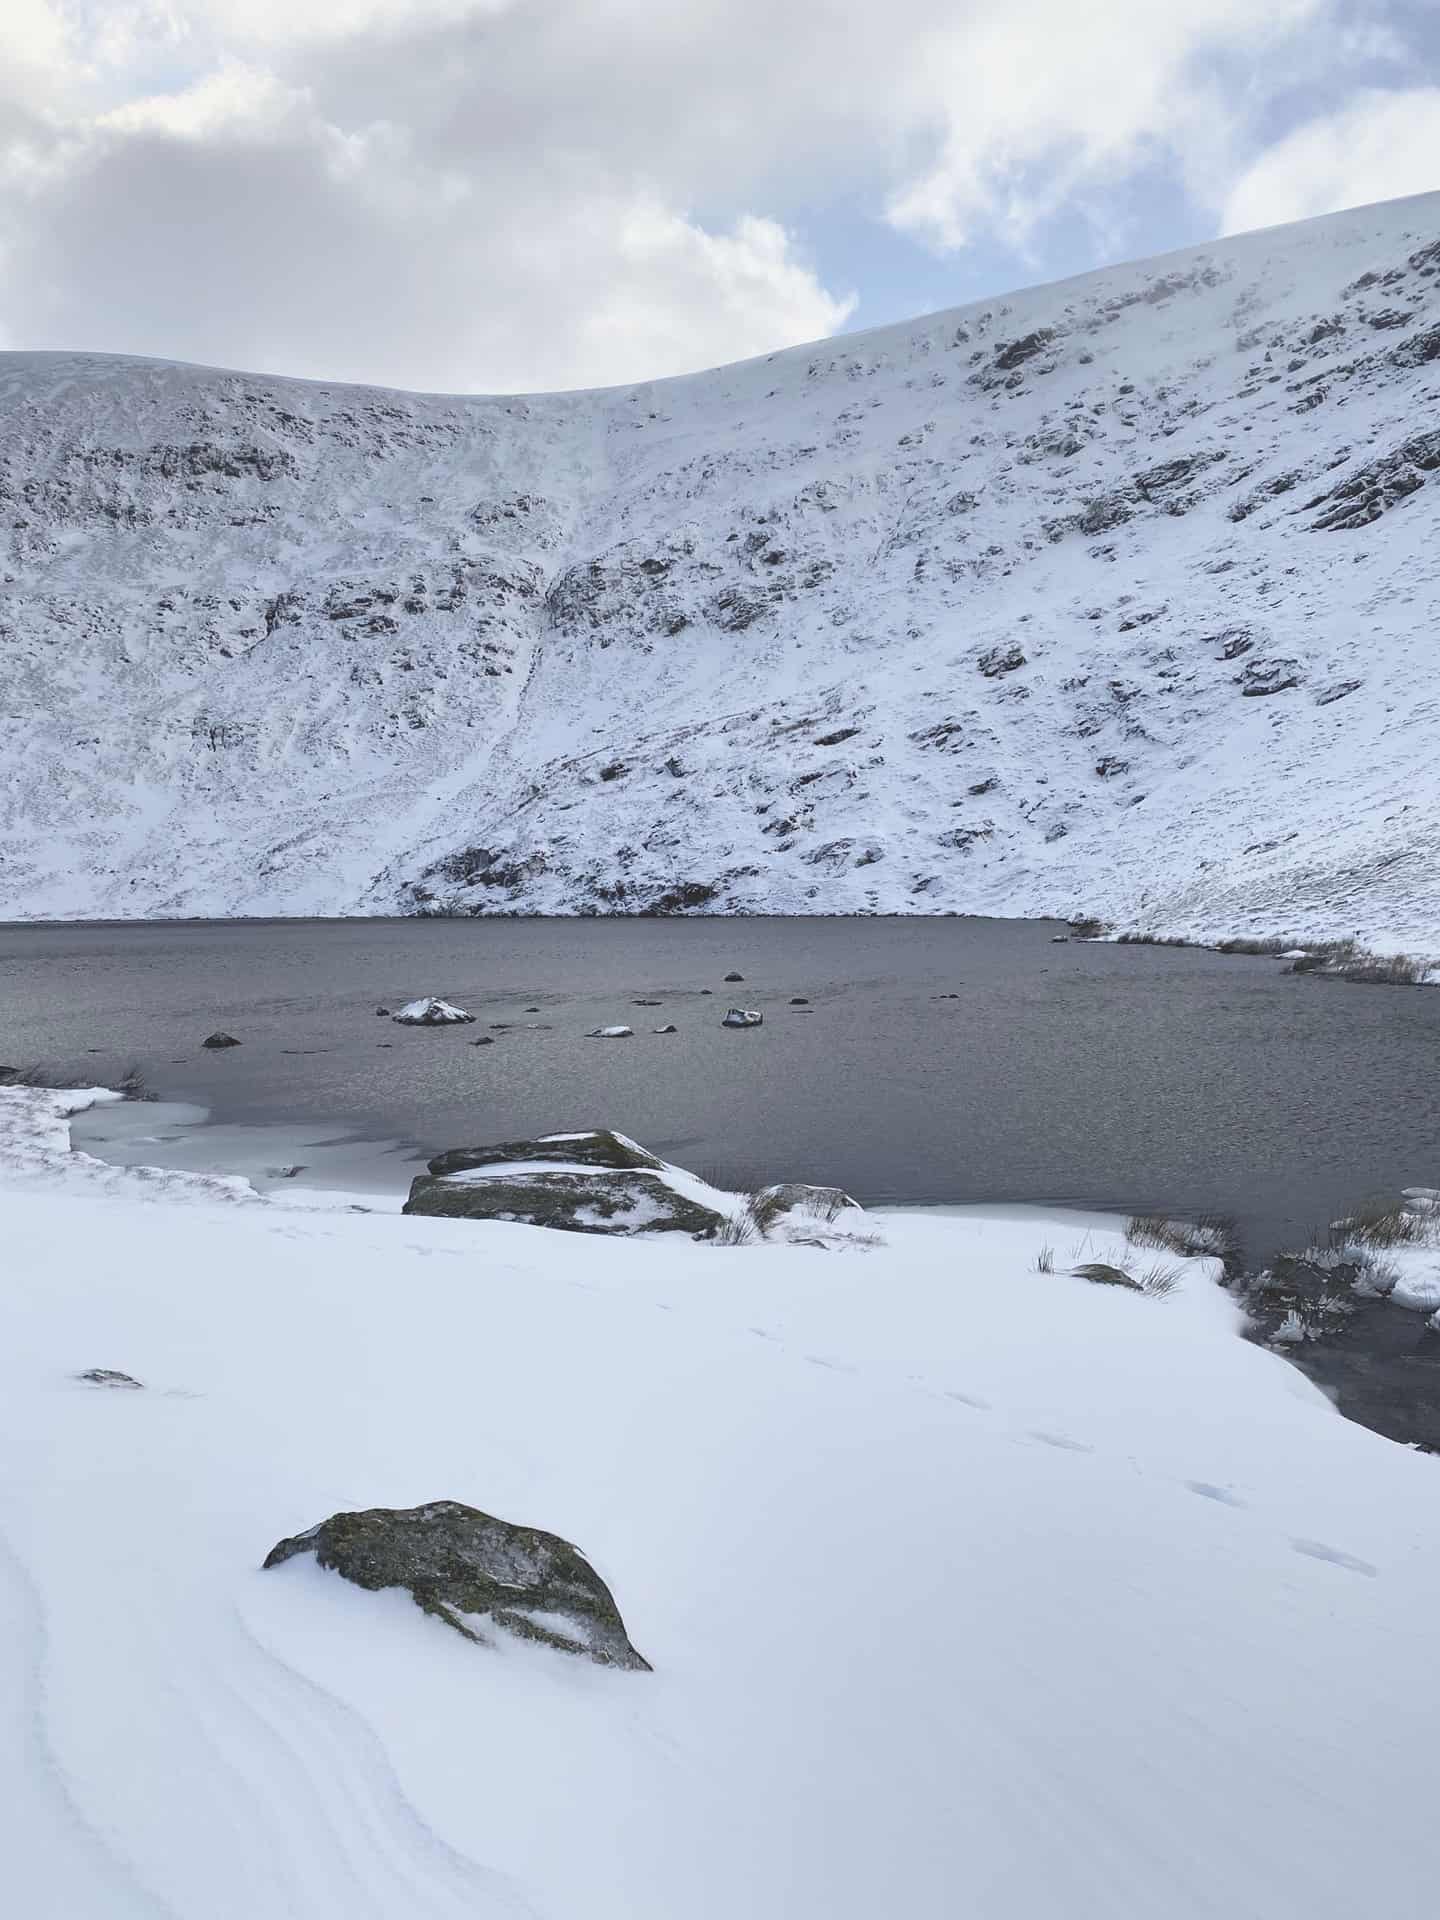 Bowscale Tarn, one of the highlights of the Bowscale Tarn walk.